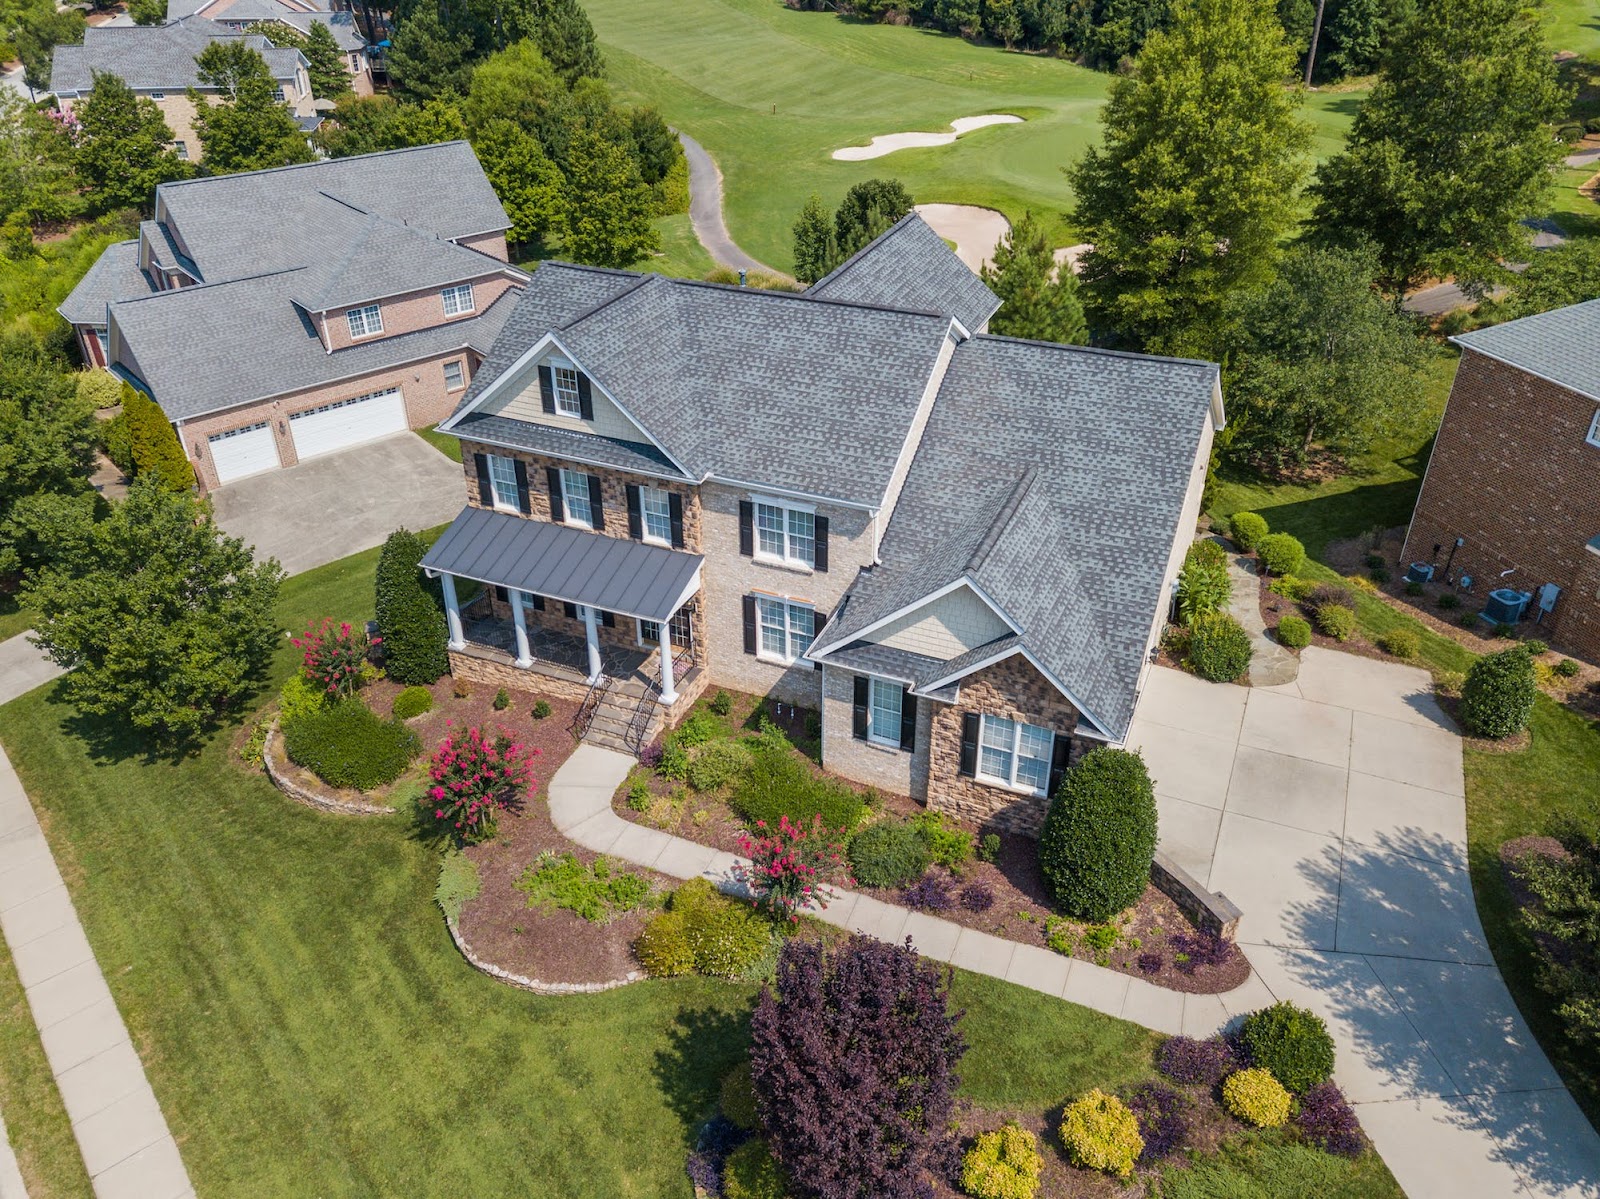 Aerial view of luxury house shot by the use of a drone.